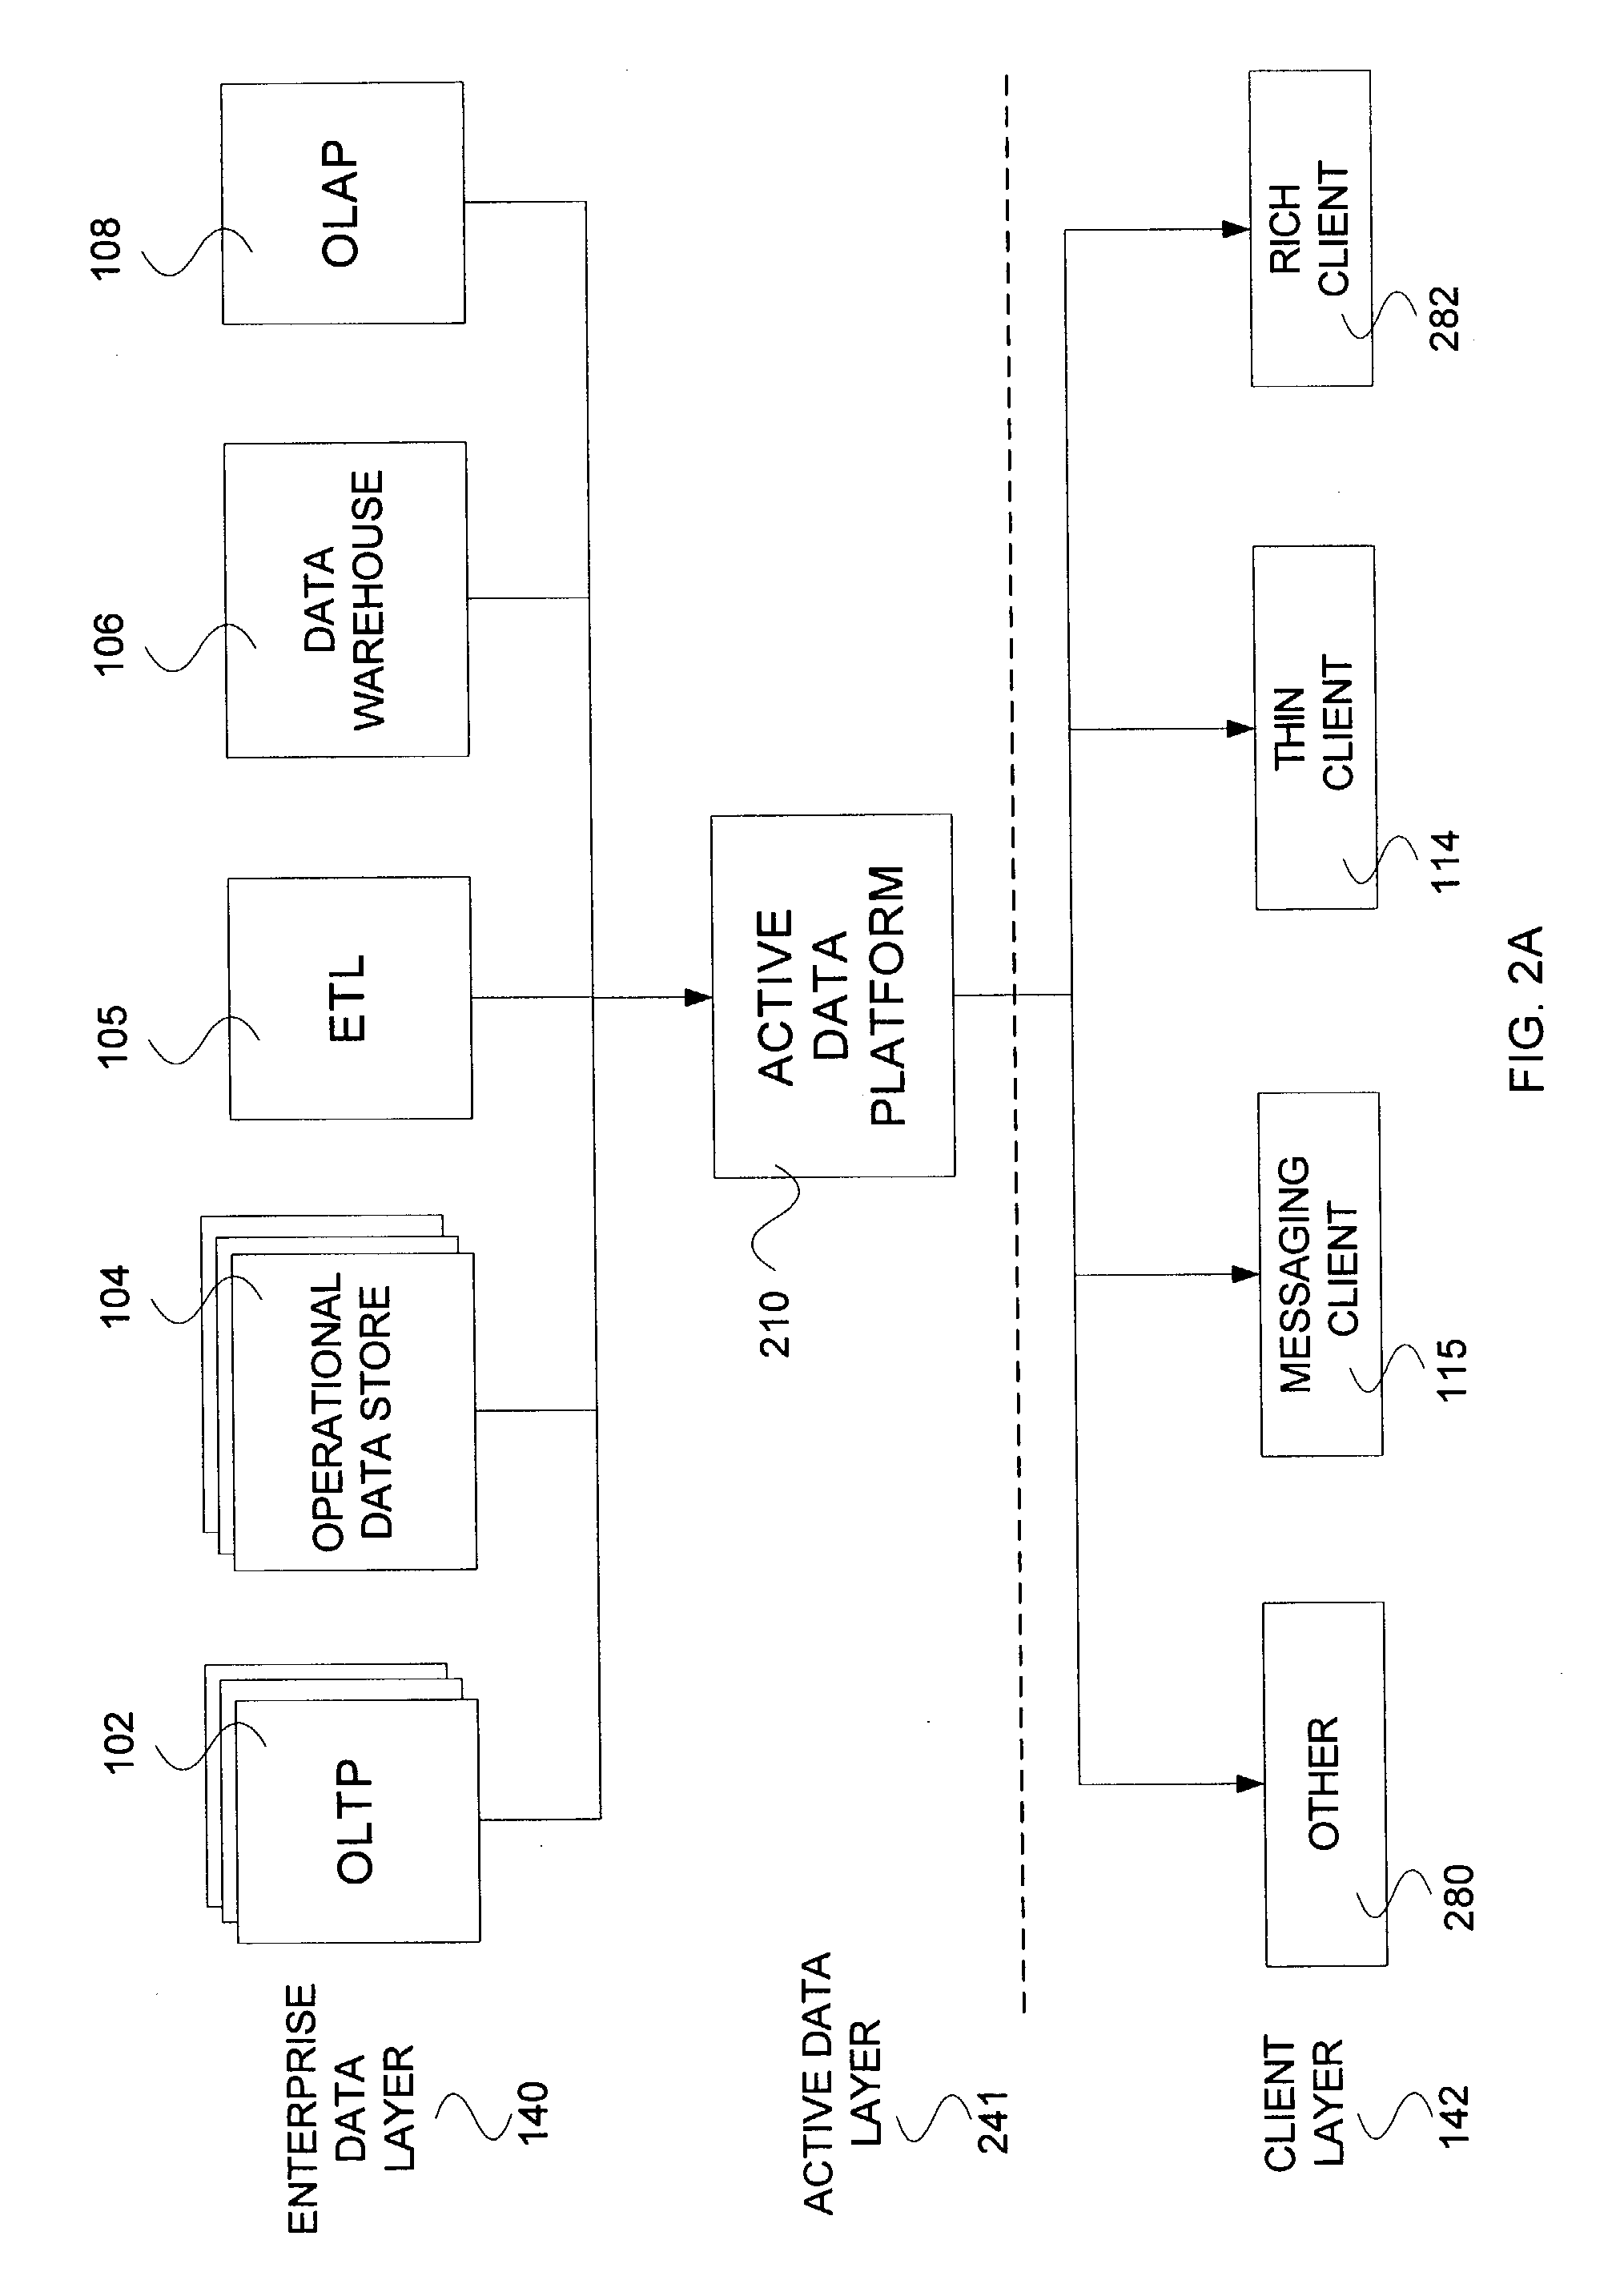 Methods and apparatus for maintaining application execution over an intermittent network connection